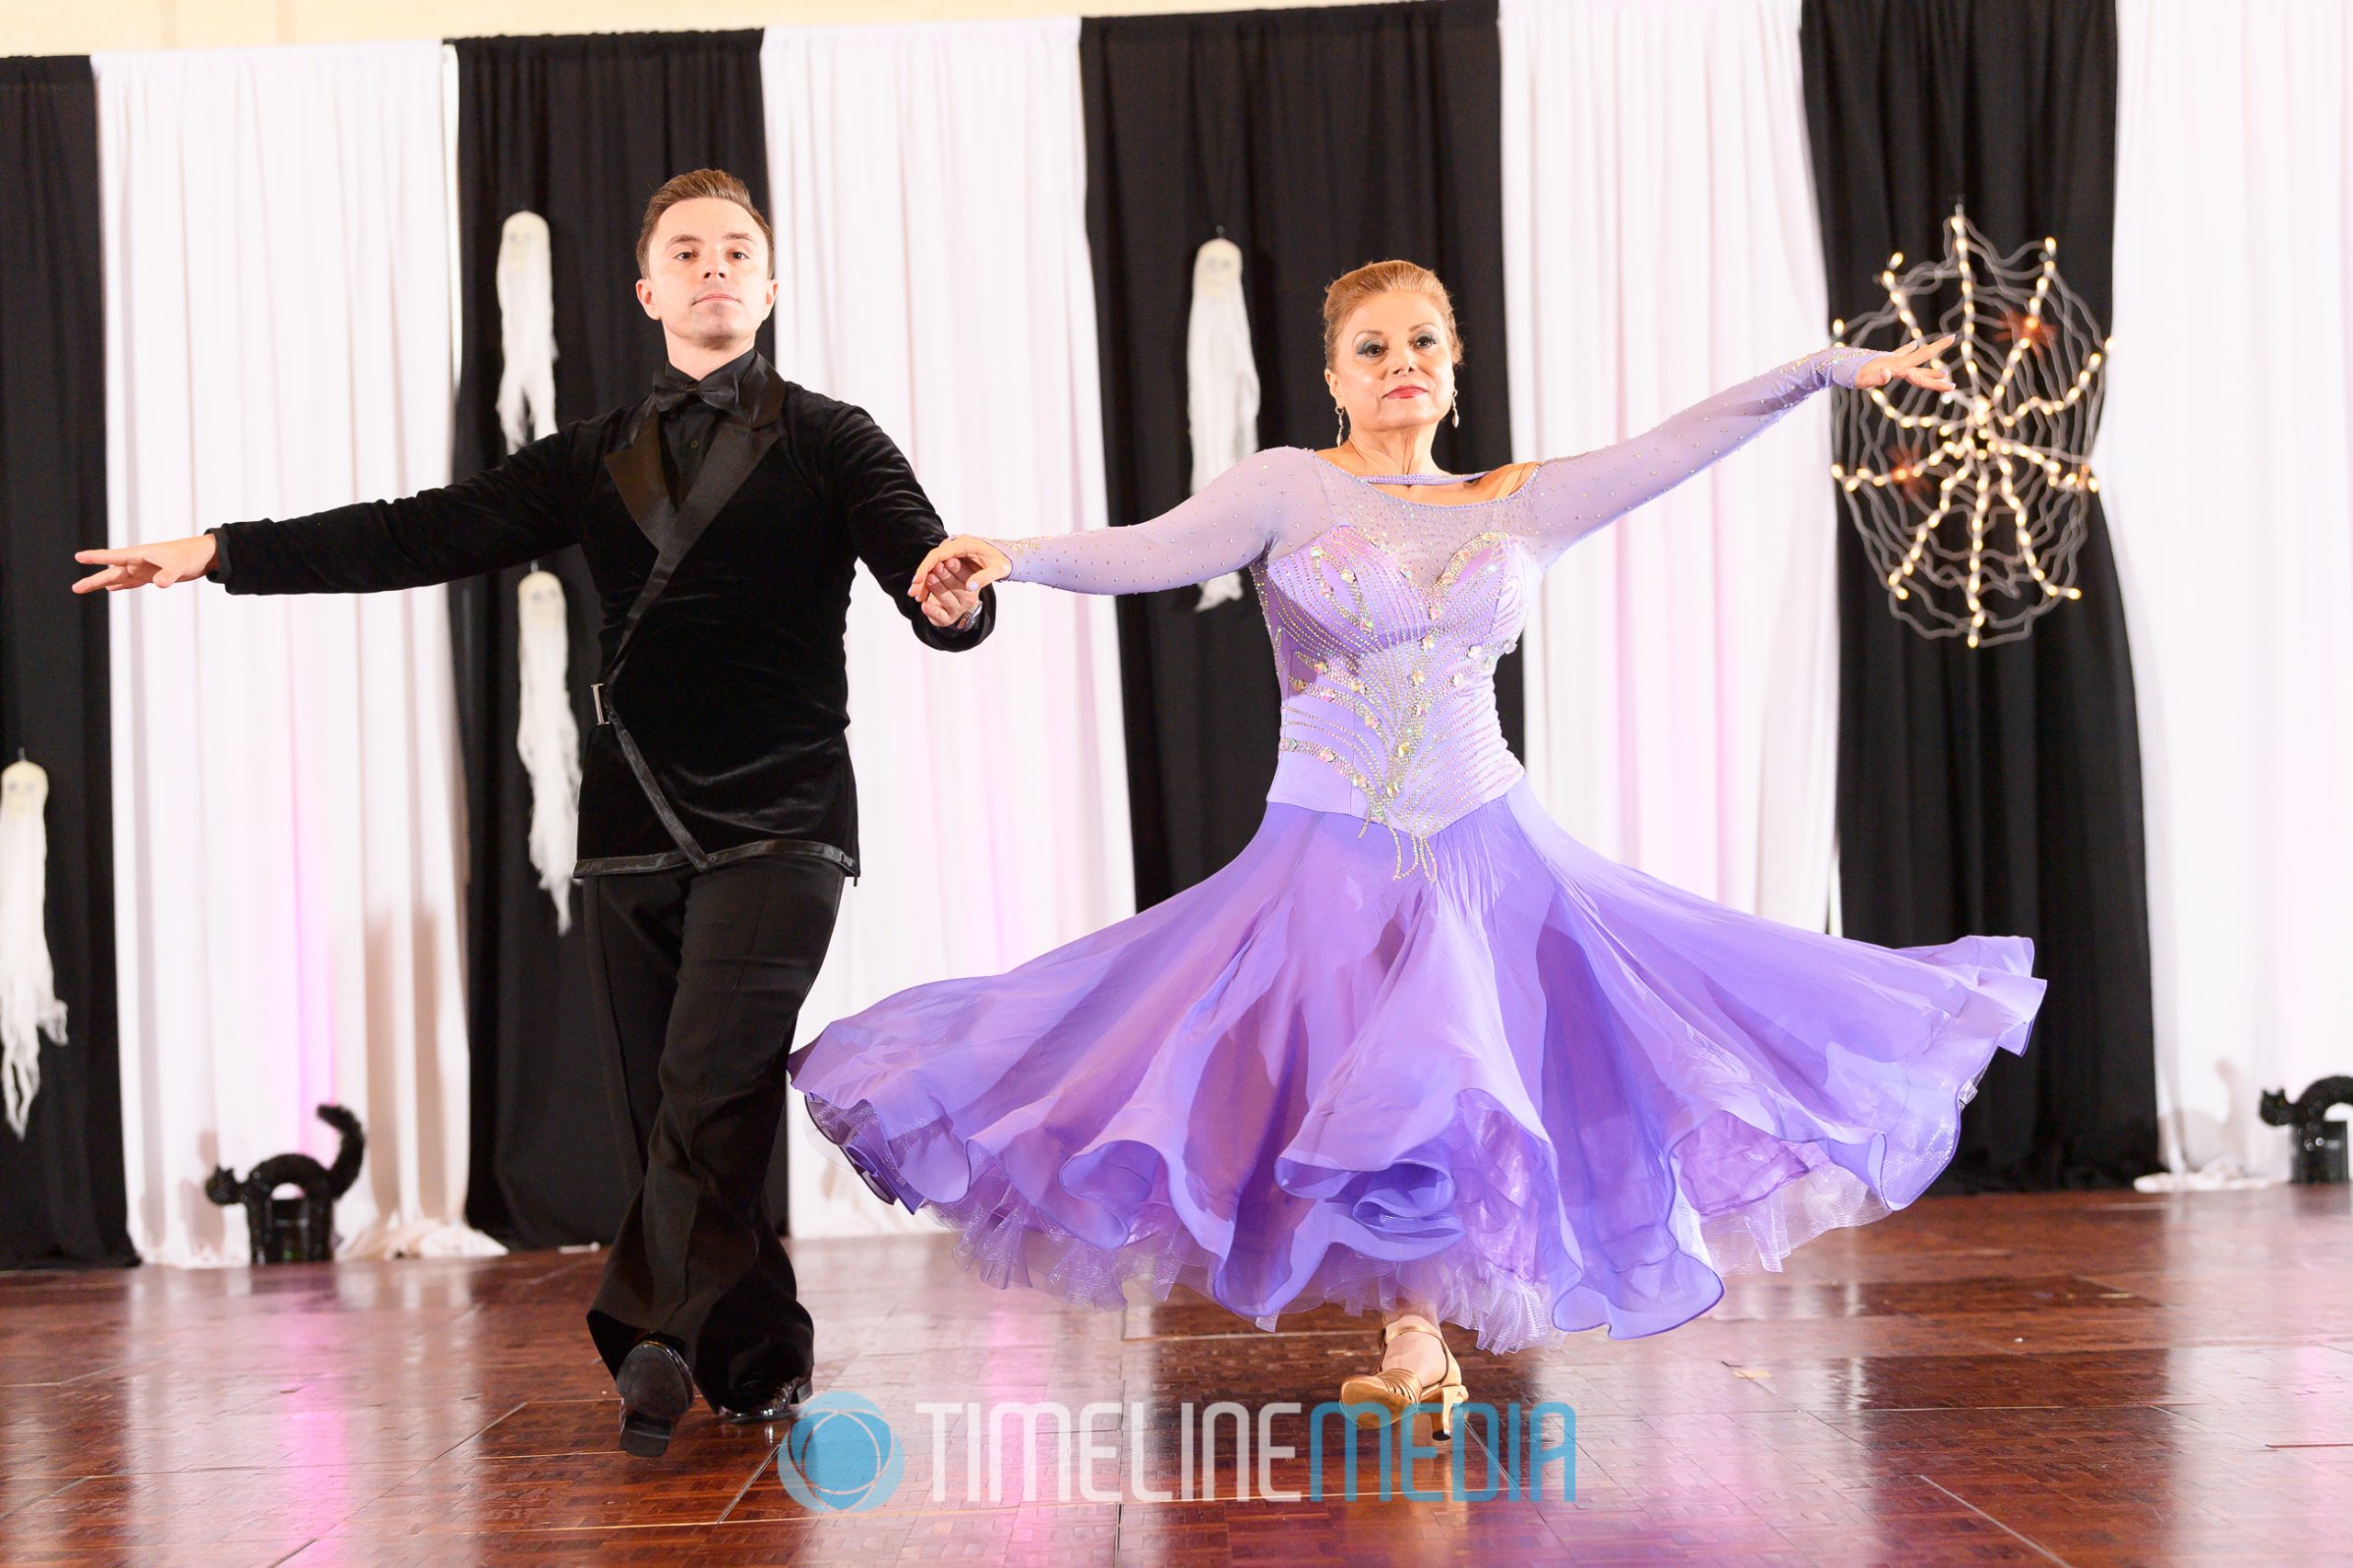 Reston Fred Astaire dance studio at the 2019 FADS Fall Fling ©TimeLine Media